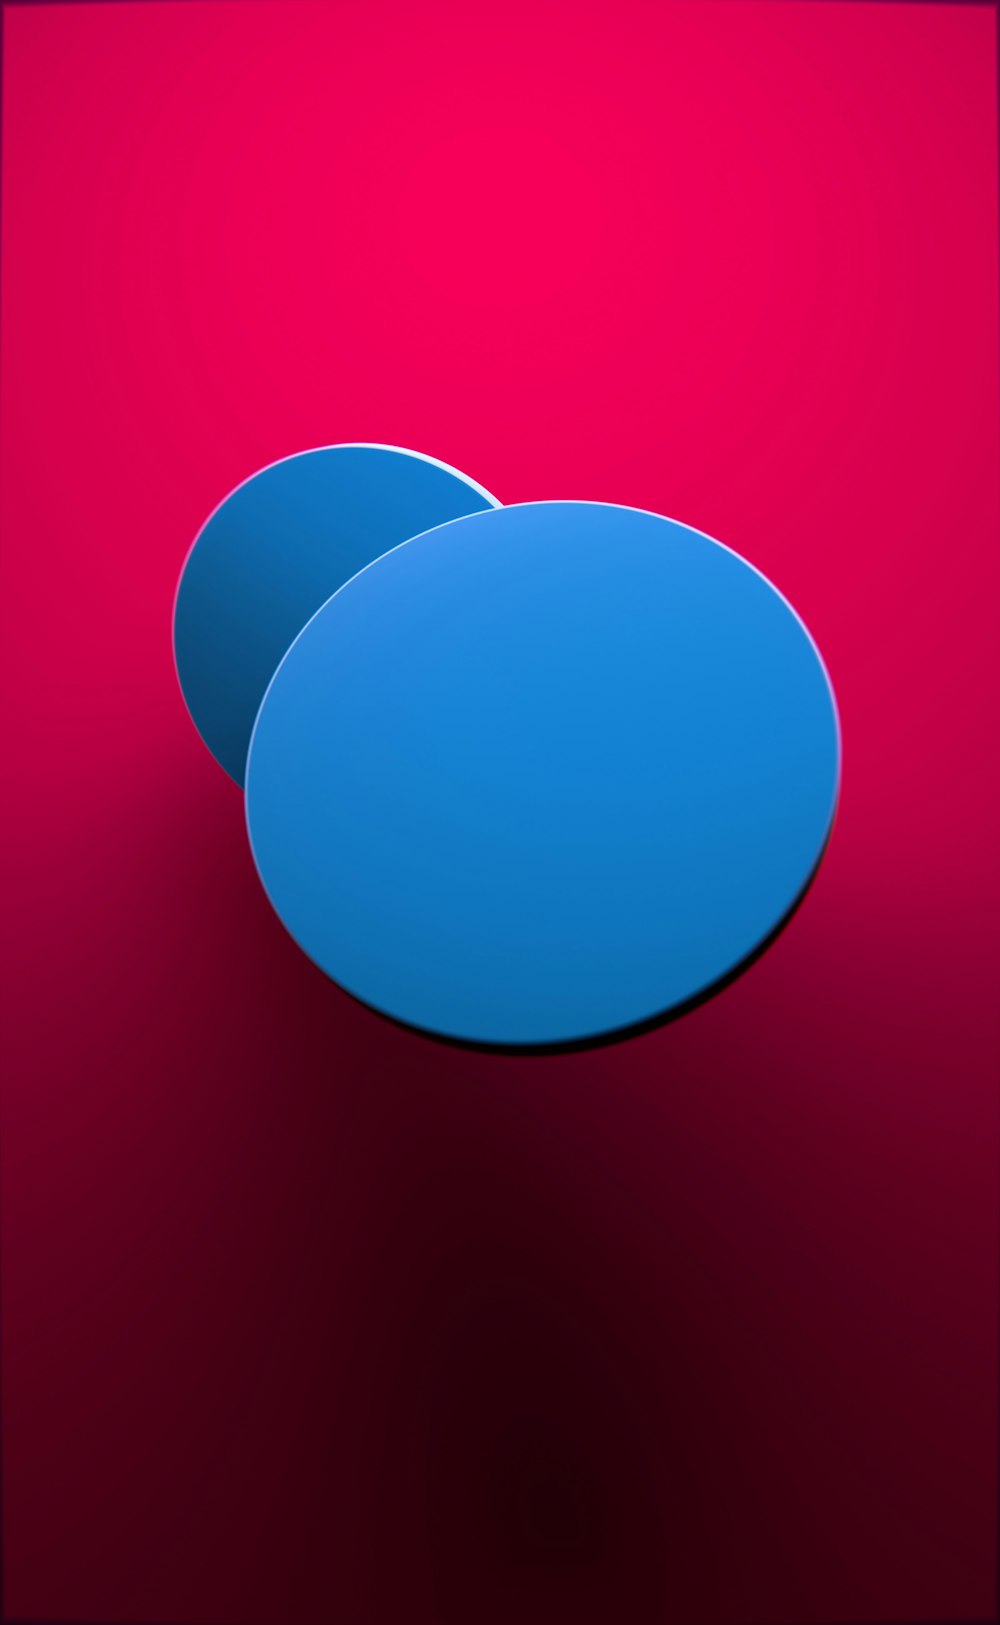 two blue circles sitting on top of a red surface